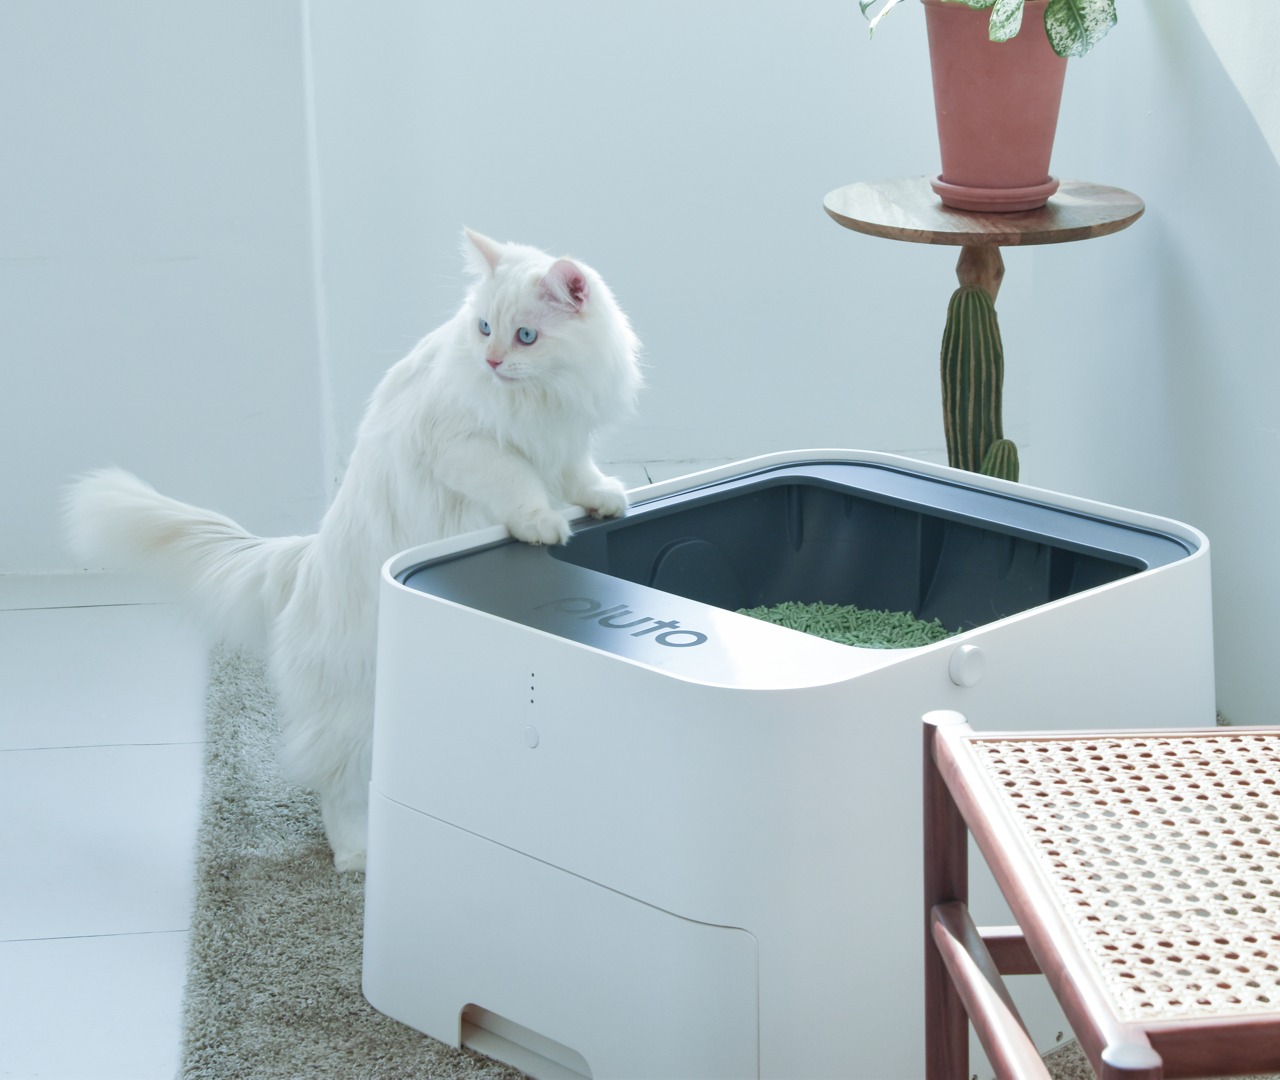 This self-cleaning cat litter-tray is fancier than the toilet astronauts do their business in…